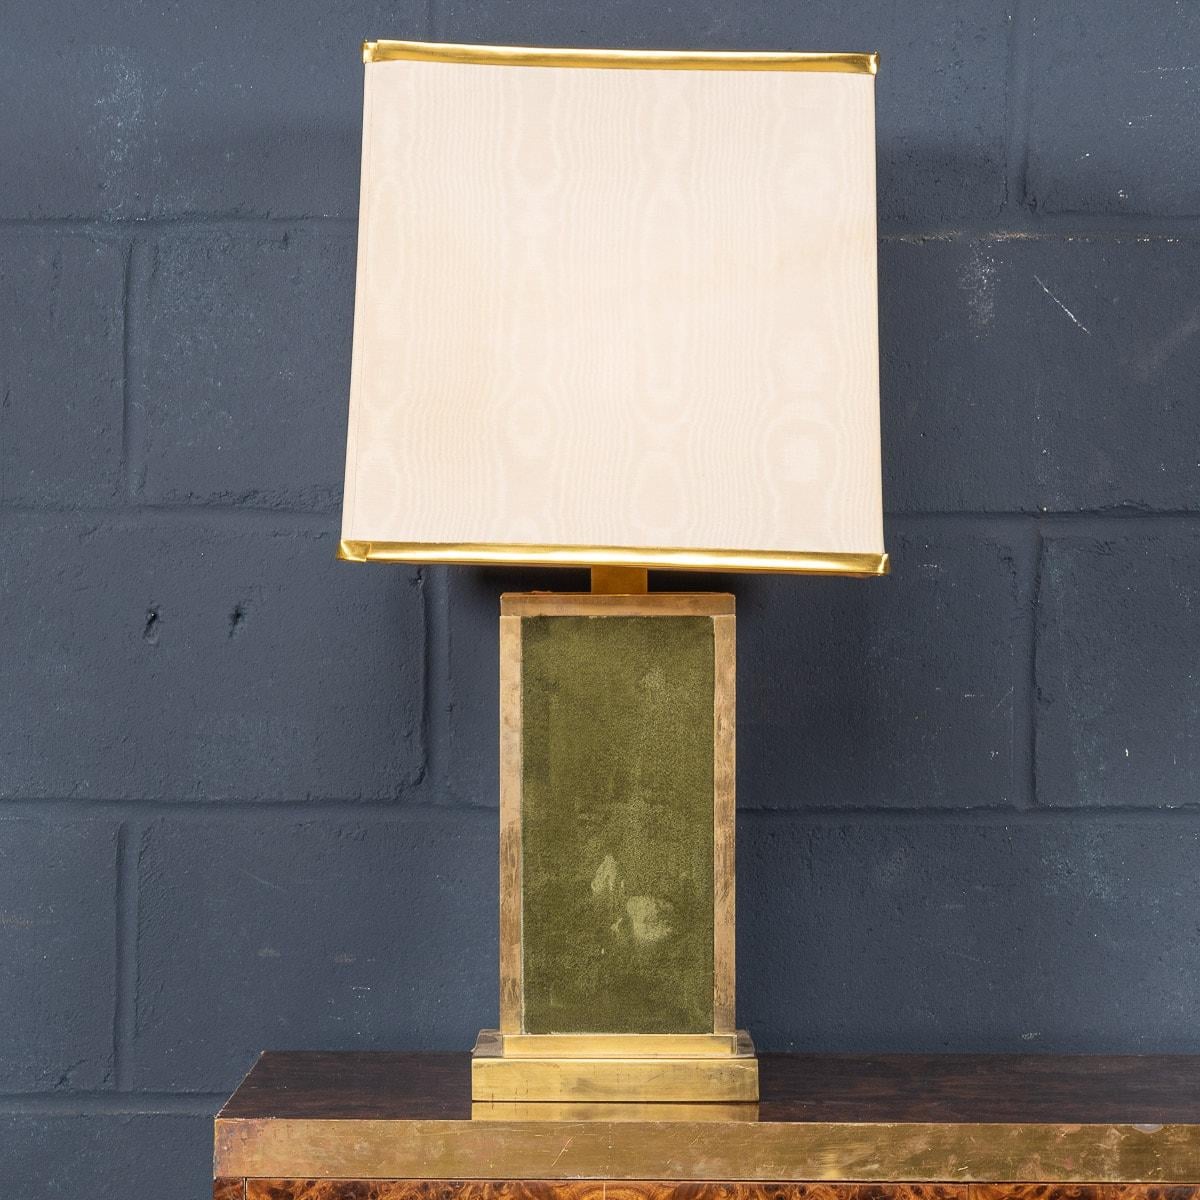 A delightful table lamp made in Italy in the 1970s. Of great proportions, this lamp is available with its original silk shade. The body of the lamp has a brass structure encasing a green suede or microfibre cladding and would look fantastic in any